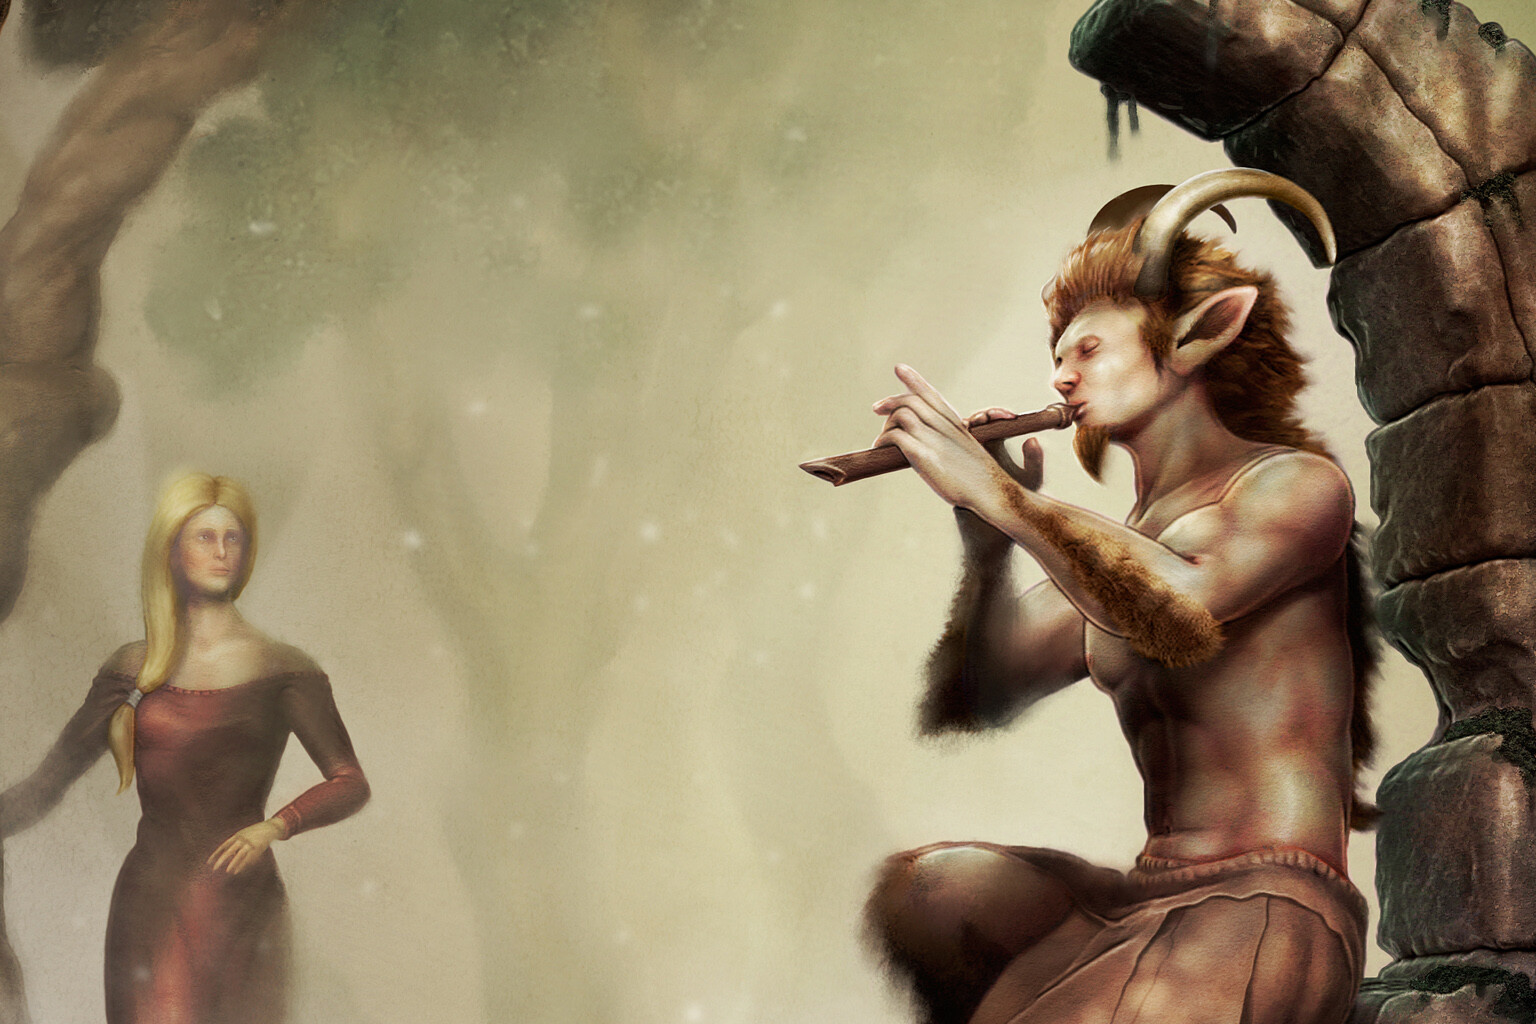 Close up of the faun and lady characters